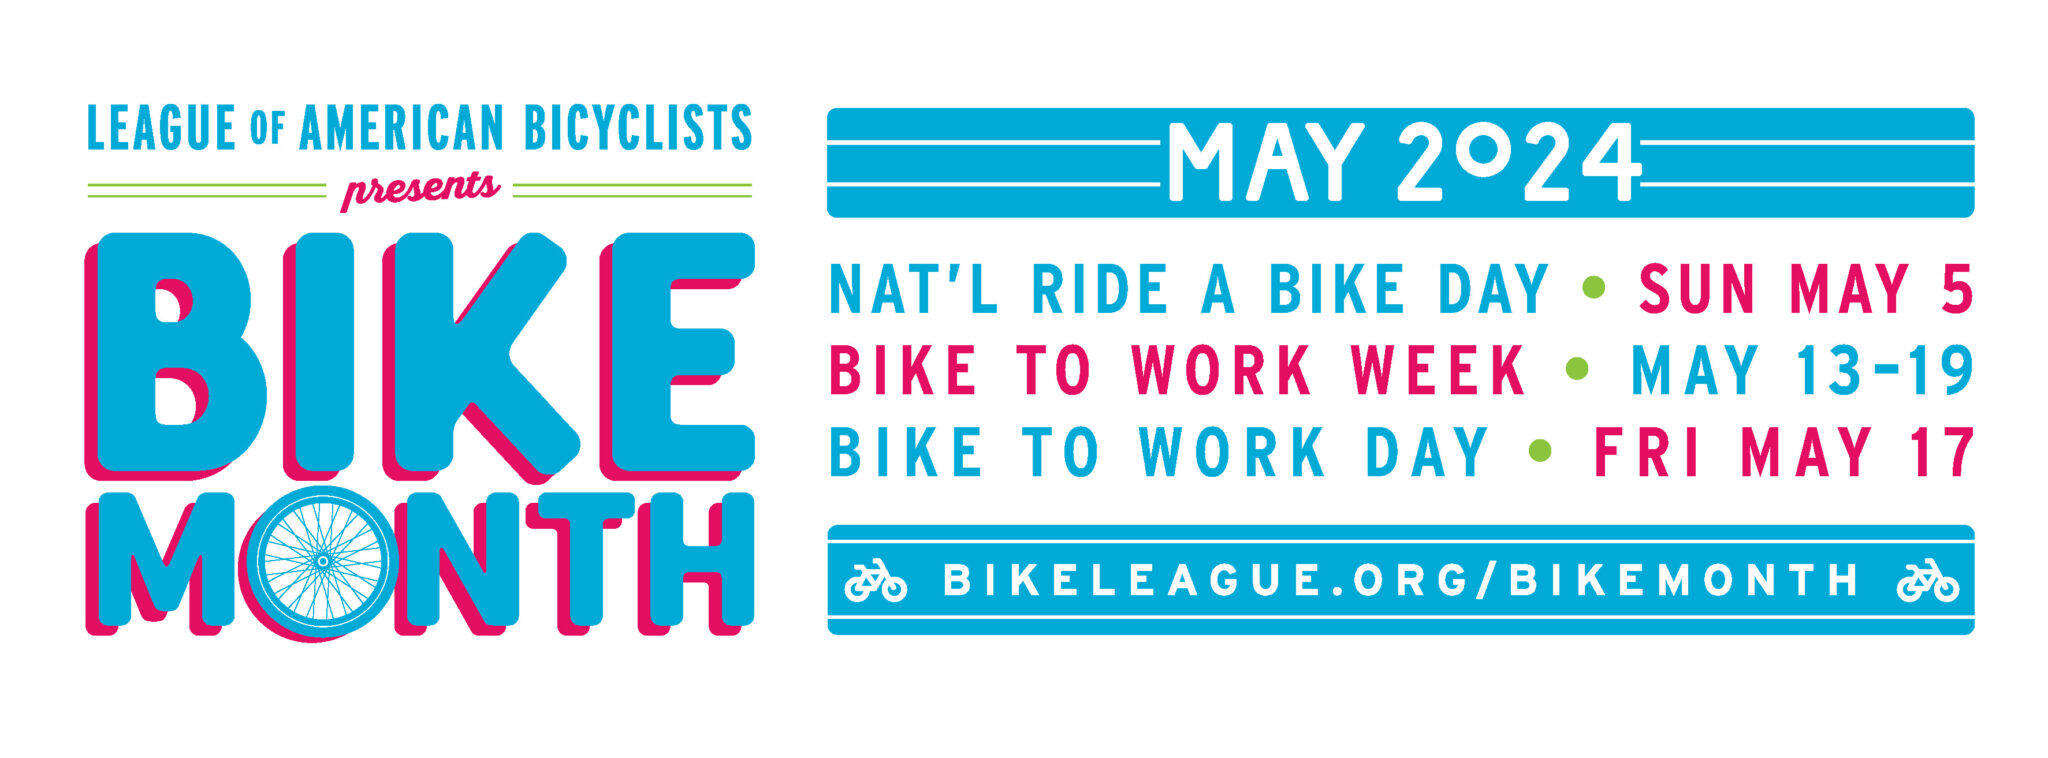 Banner from League of American Bicyclists for Bike to Work Day